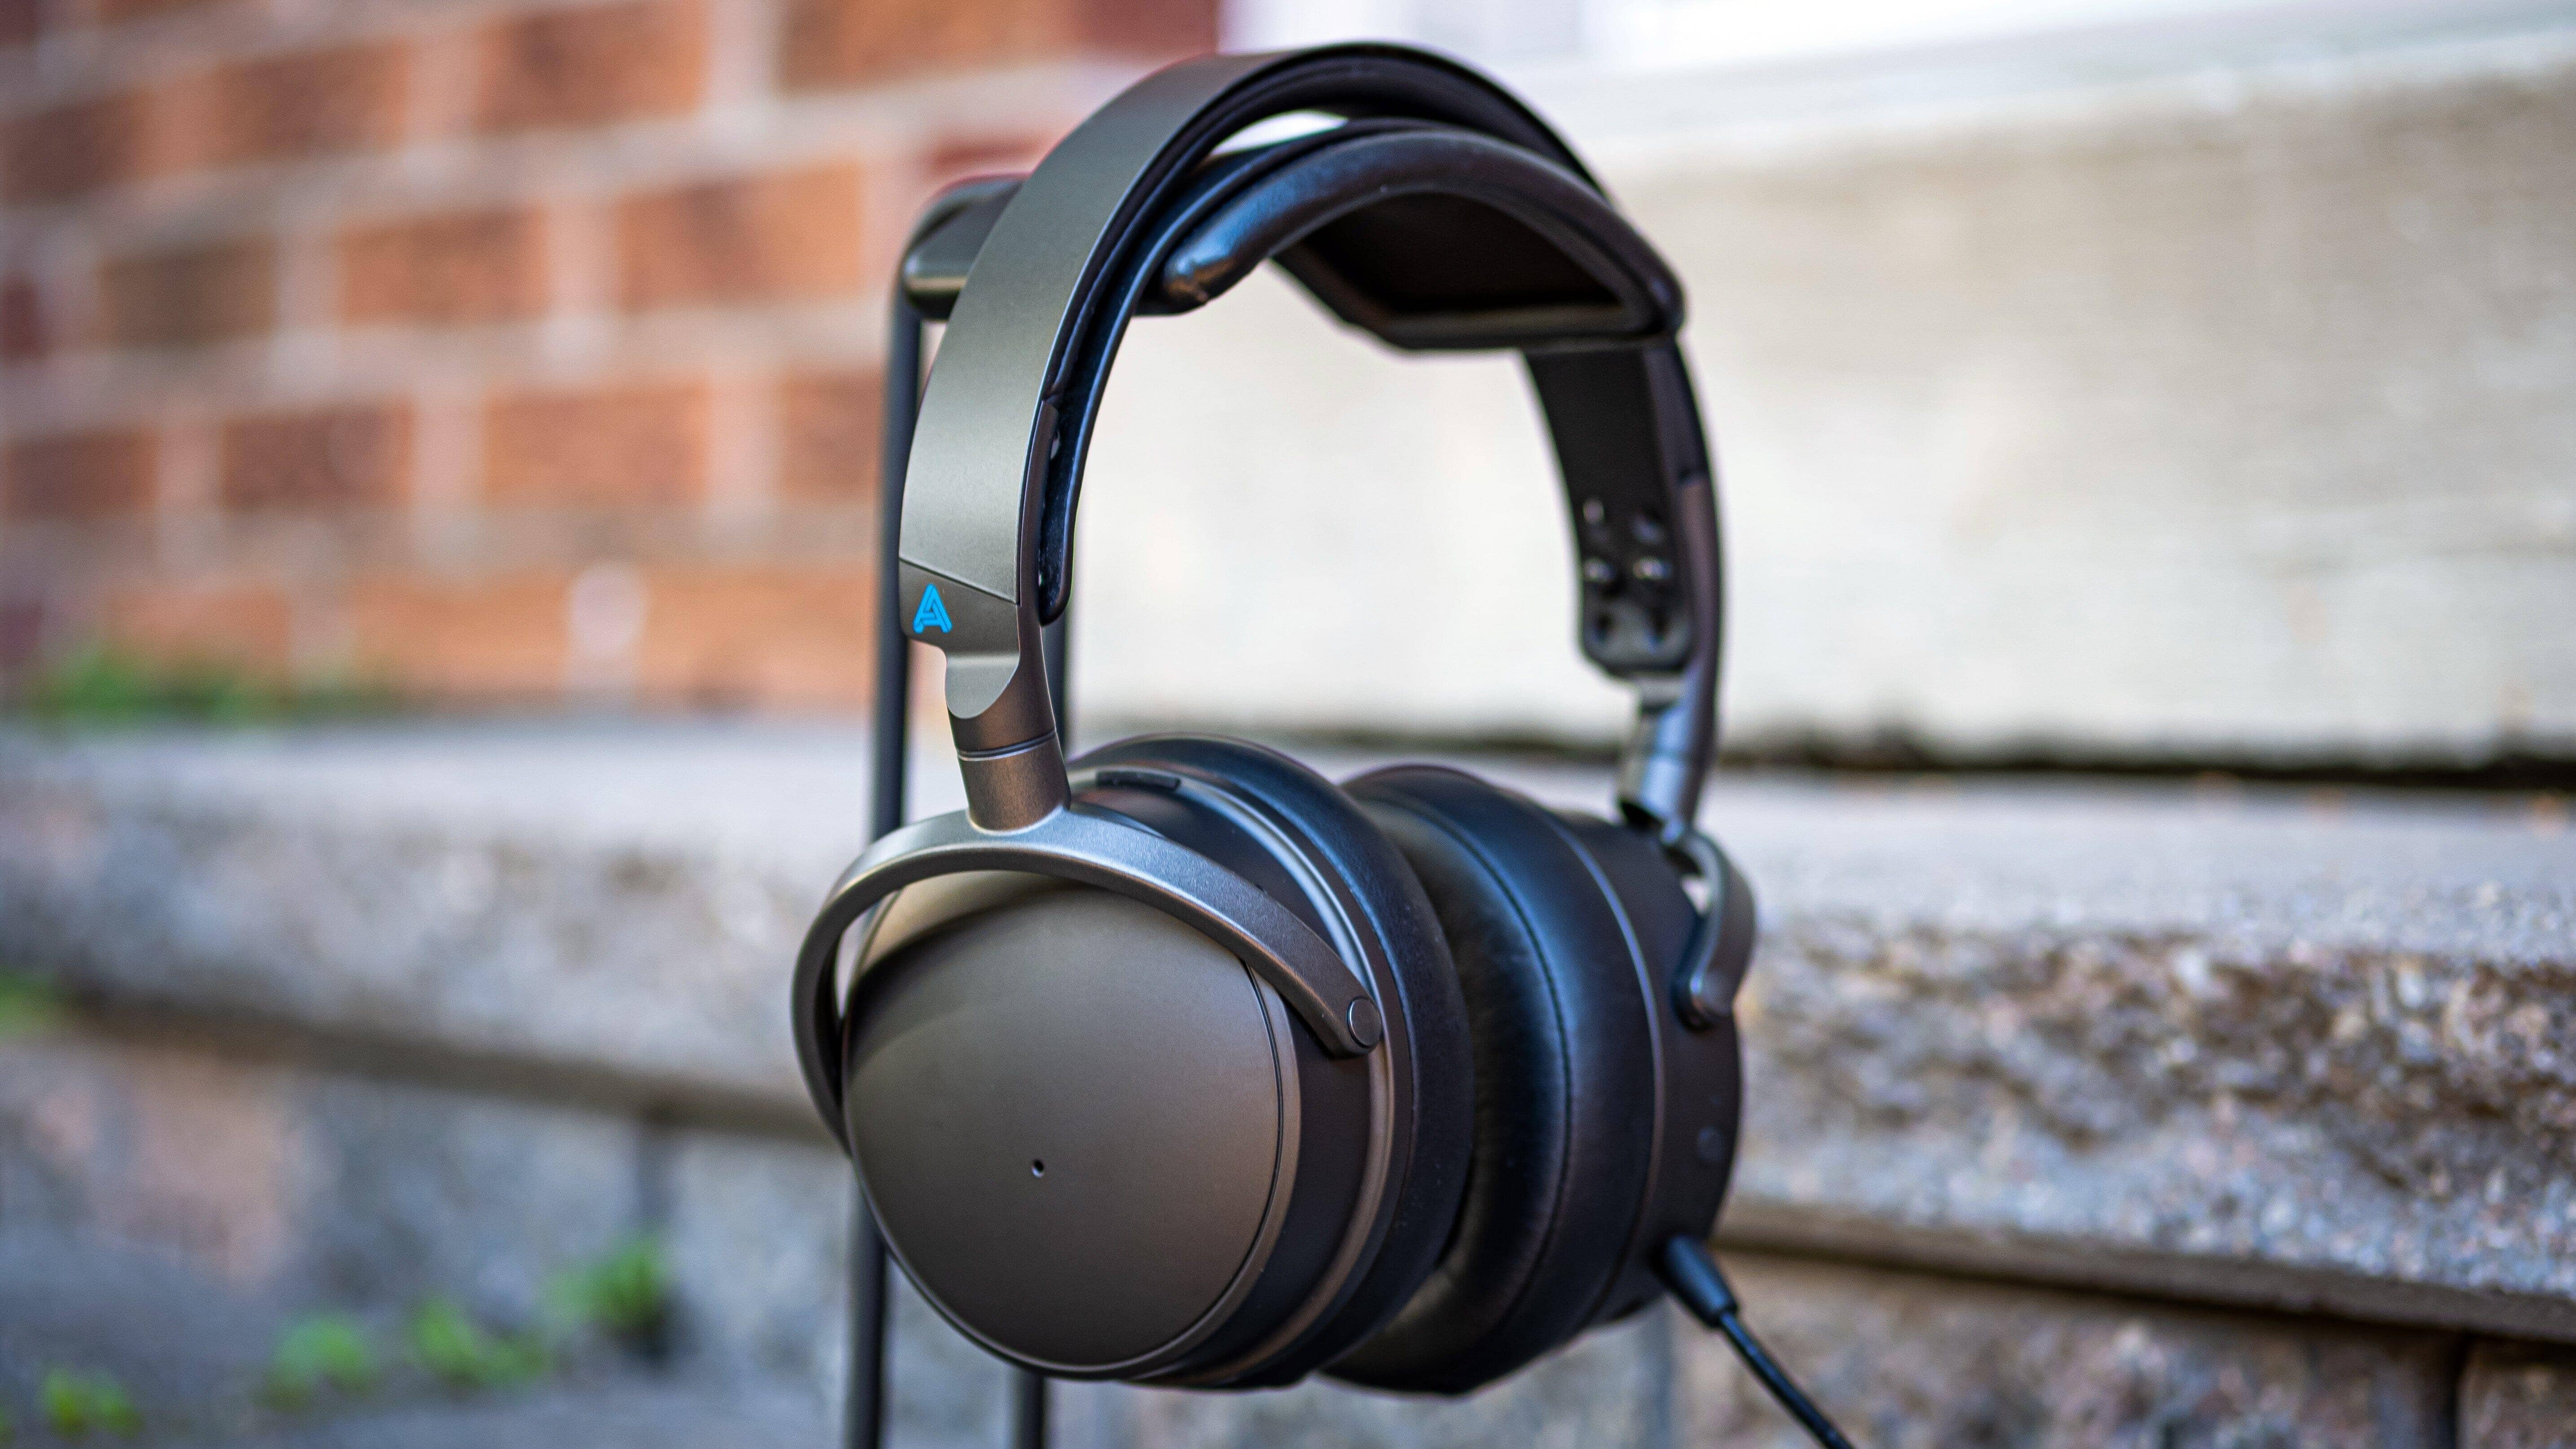 Audeze Maxwell Review: The Greatest Value in Wireless Headphones